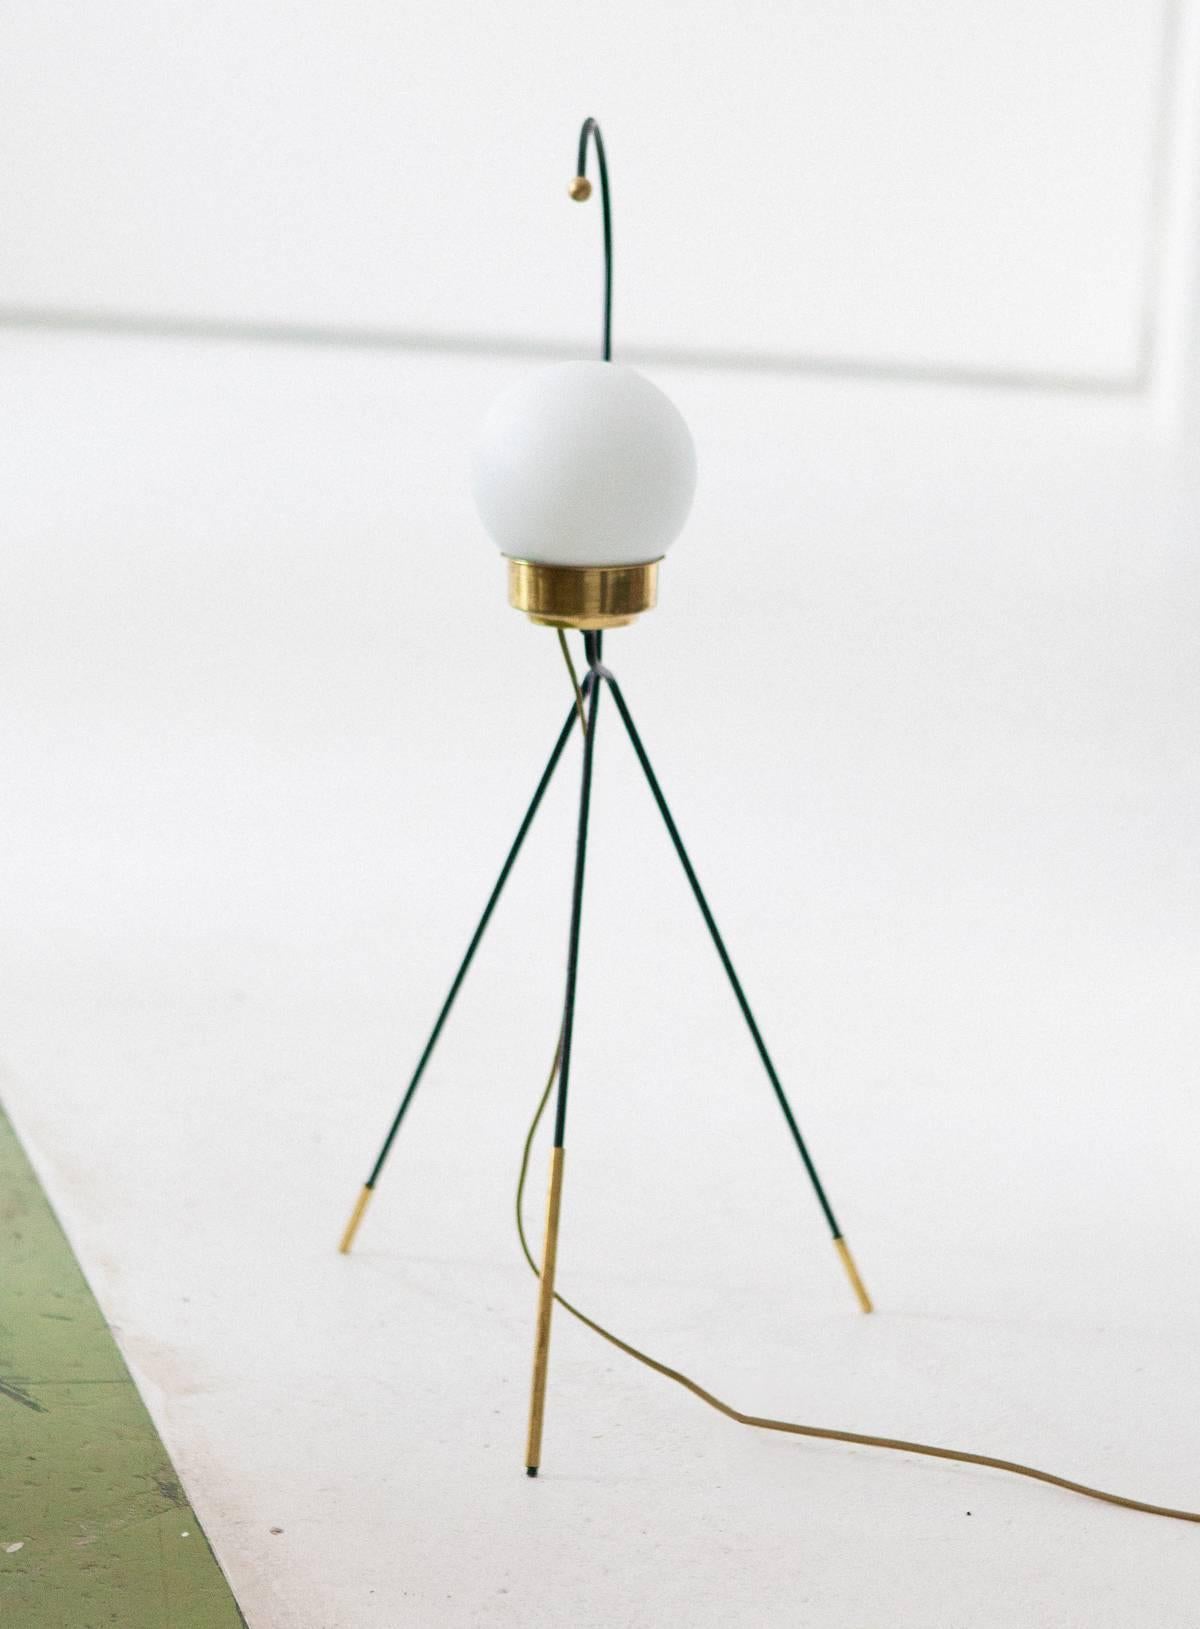 An Italian modern floor or table lamp from the 1950s
Iron frame with brass parts and opaline glass shade.
   